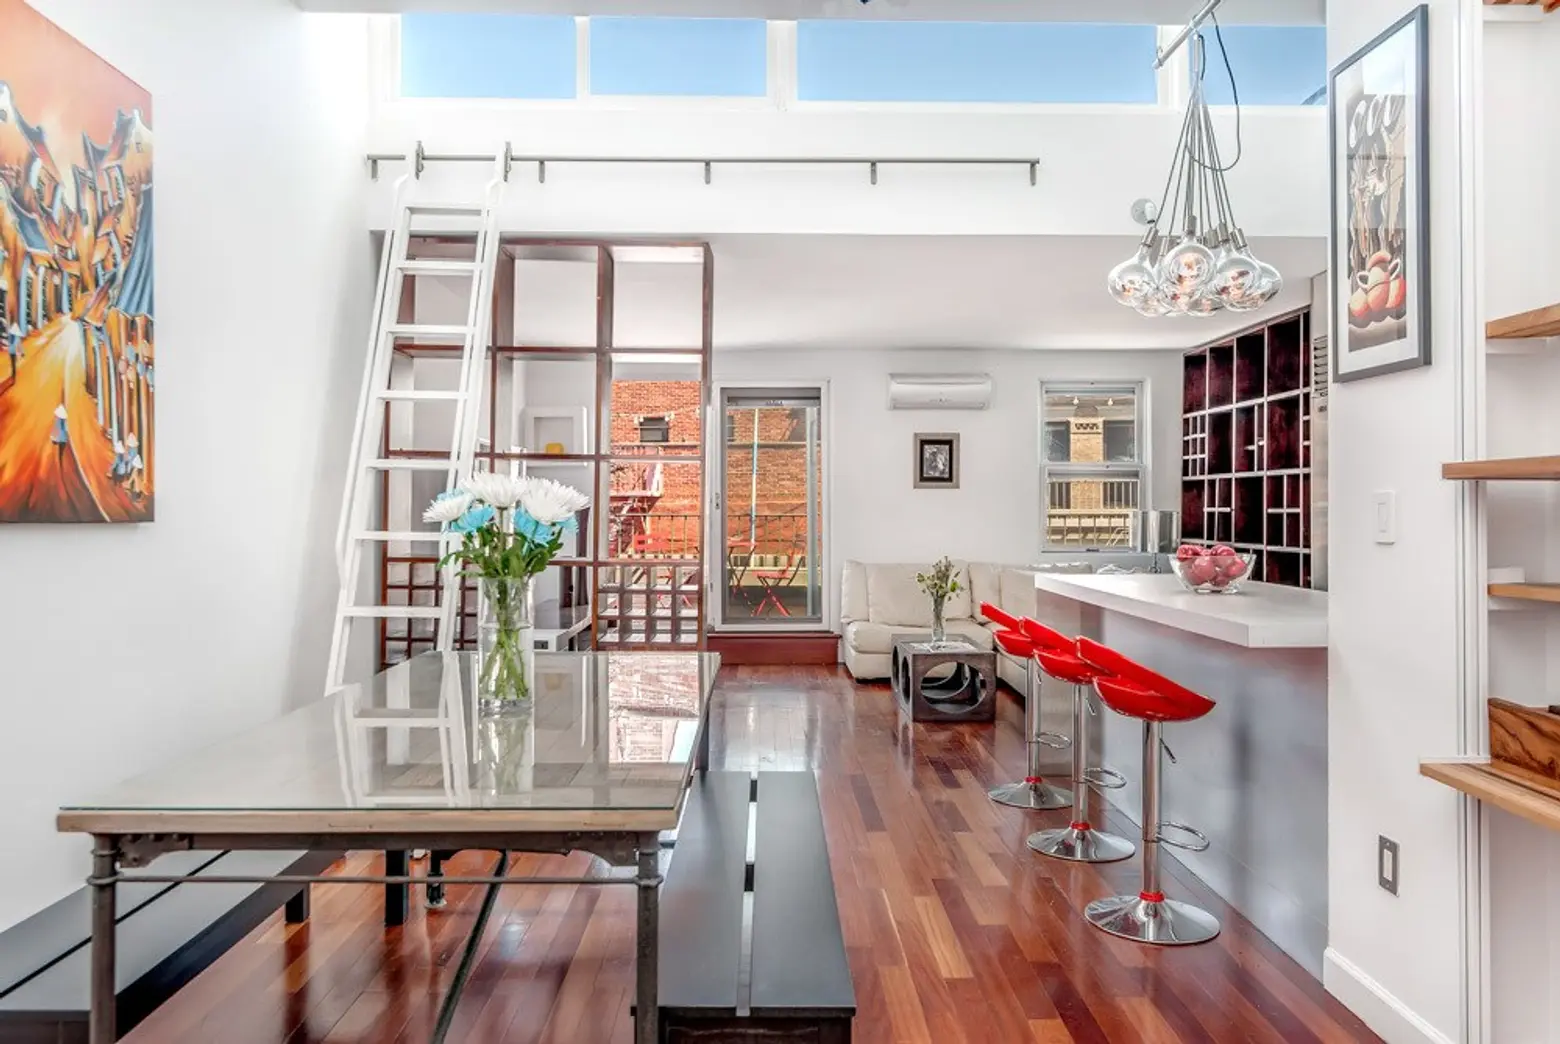 Asking $6,800/month, this compact Nolita penthouse has a sweet rooftop terrace